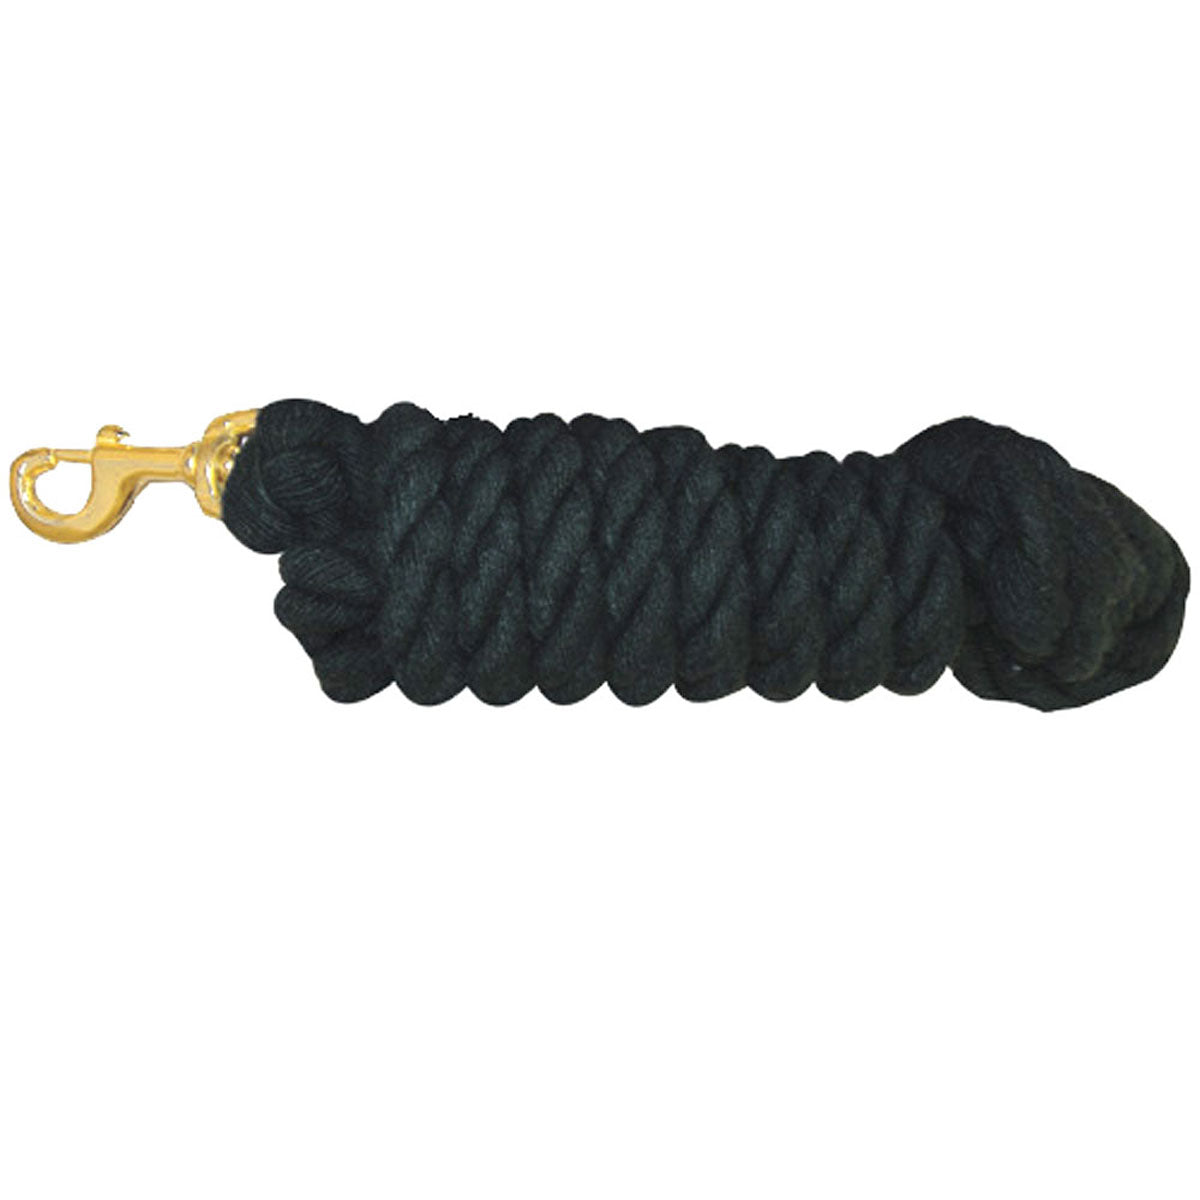 Heavy Duty Cotton Lead Rope with Brass Snap 3/4" x 10'